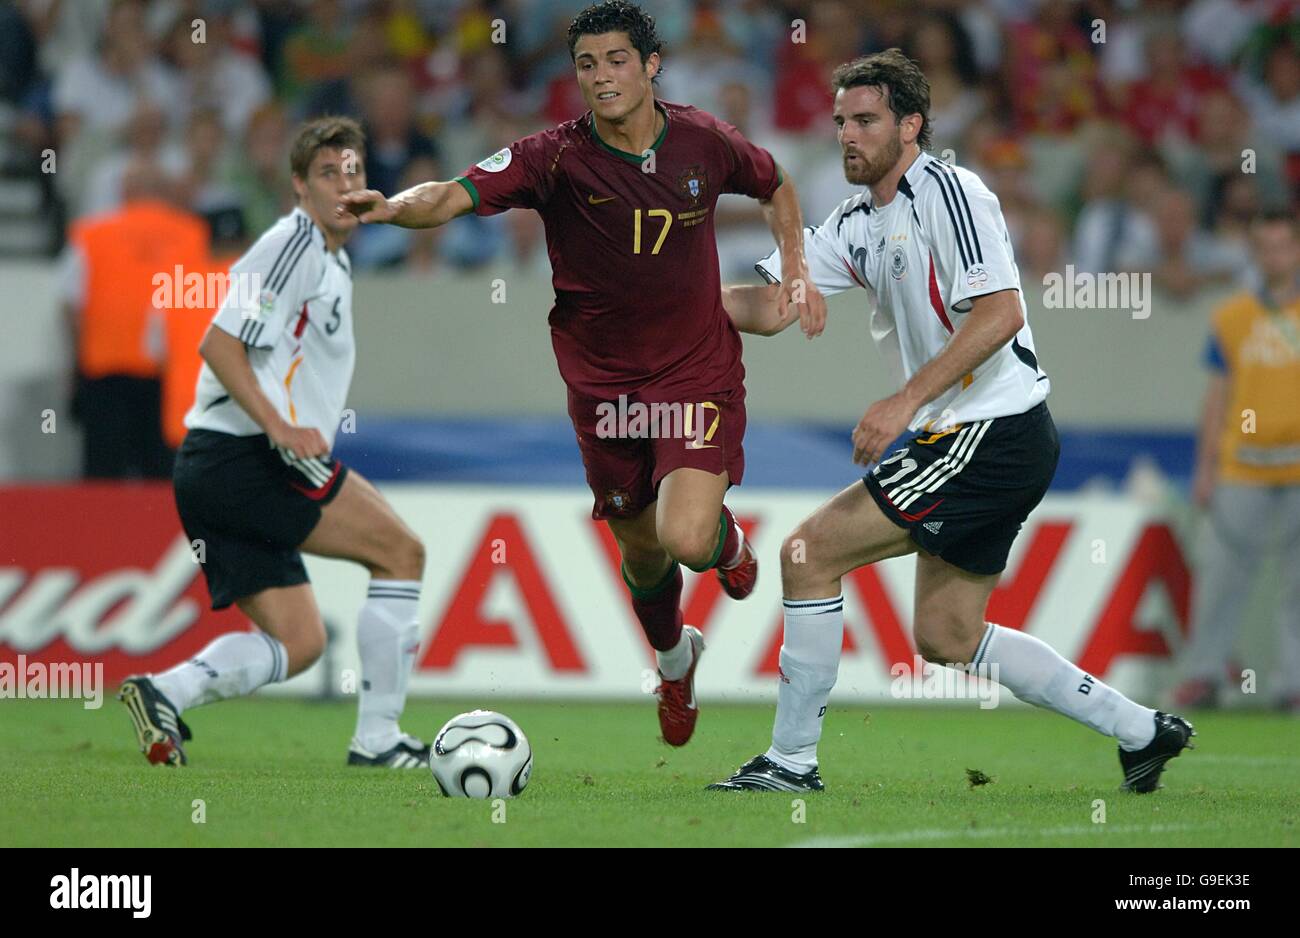 Soccer - 2006 FIFA World Cup Germany - Third Place Play-Off - Germany v Portugal - Gottlieb-Daimler-Stadion. Portugal's Cristiano Ronaldo goes down under the challenge from Germany's Christoph Metzelder Stock Photo